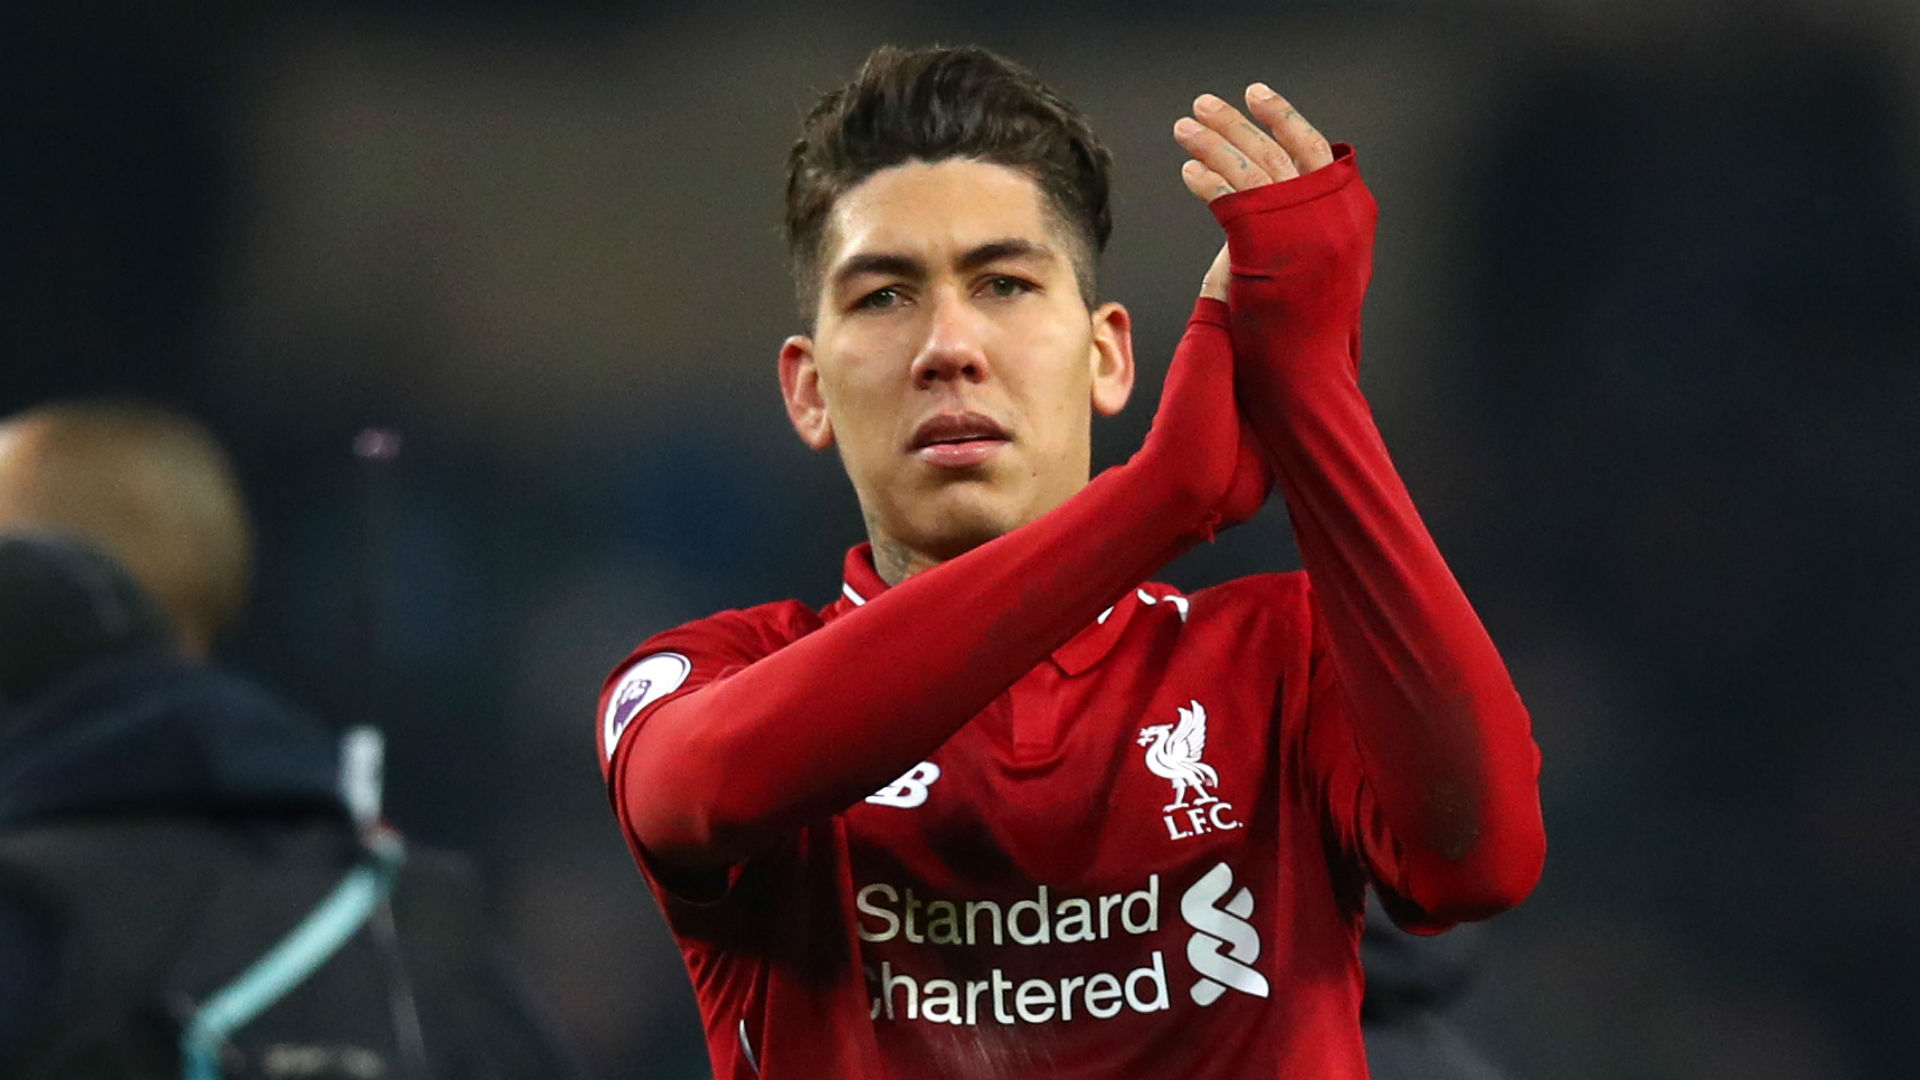 Free download Roberto Firmino Wallpapers 60 Latest HD Images of Firmino  [1920x1080] for your Desktop, Mobile & Tablet | Explore 21+ Roberto Firmino  2019 Wallpapers | Roberto Clemente Wallpaper, Wallpapers 2019, Welcome 2019  Wallpapers